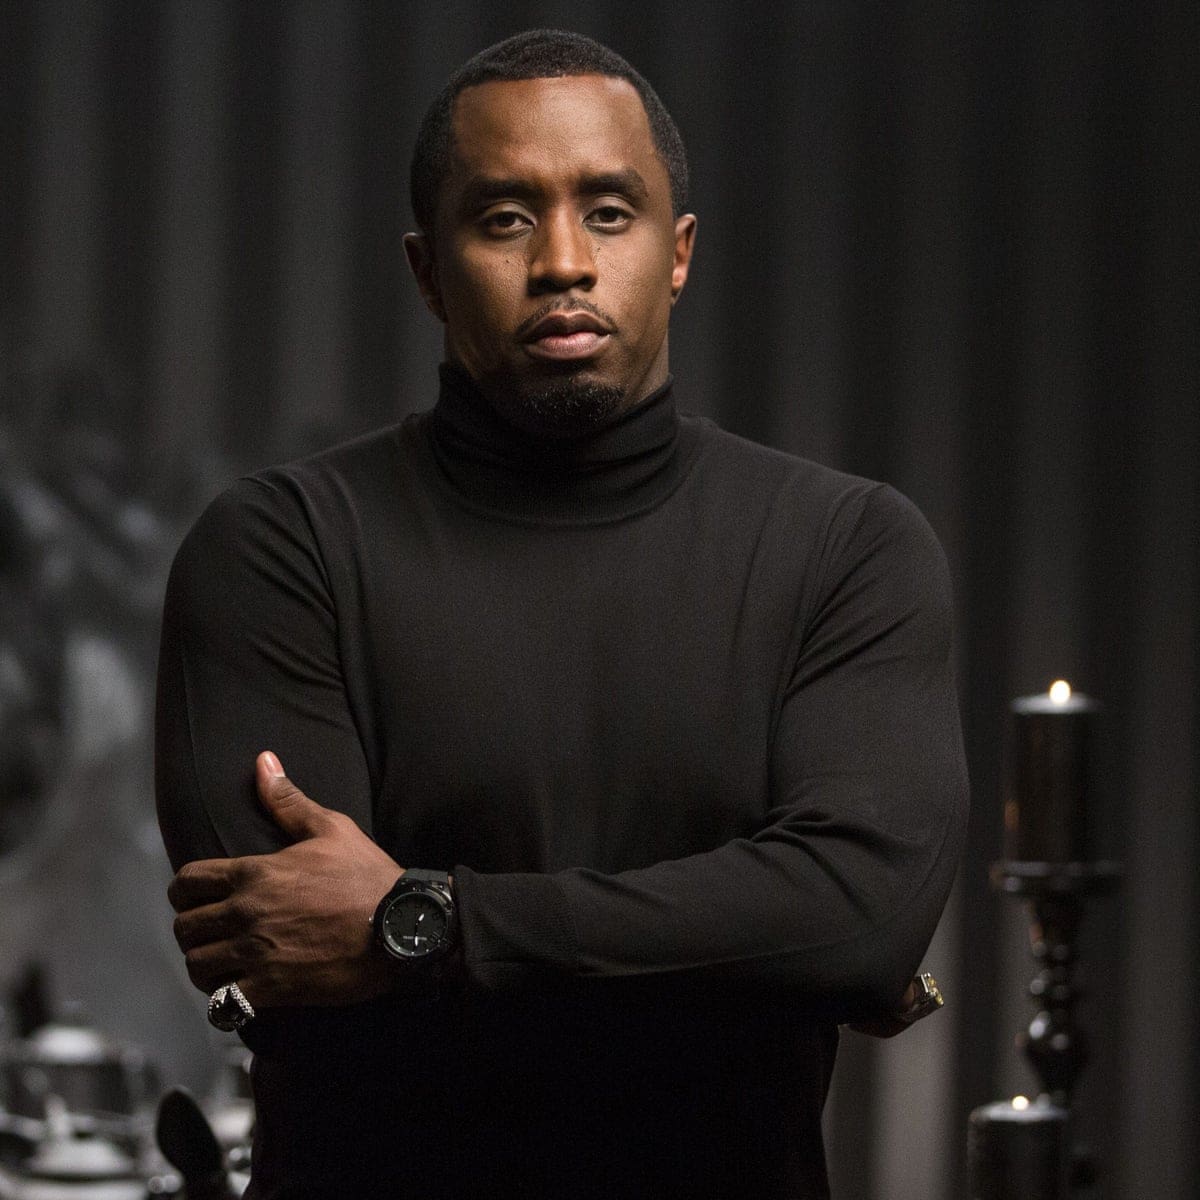 diddy-achieves-important-victory-involving-his-fashion-brand